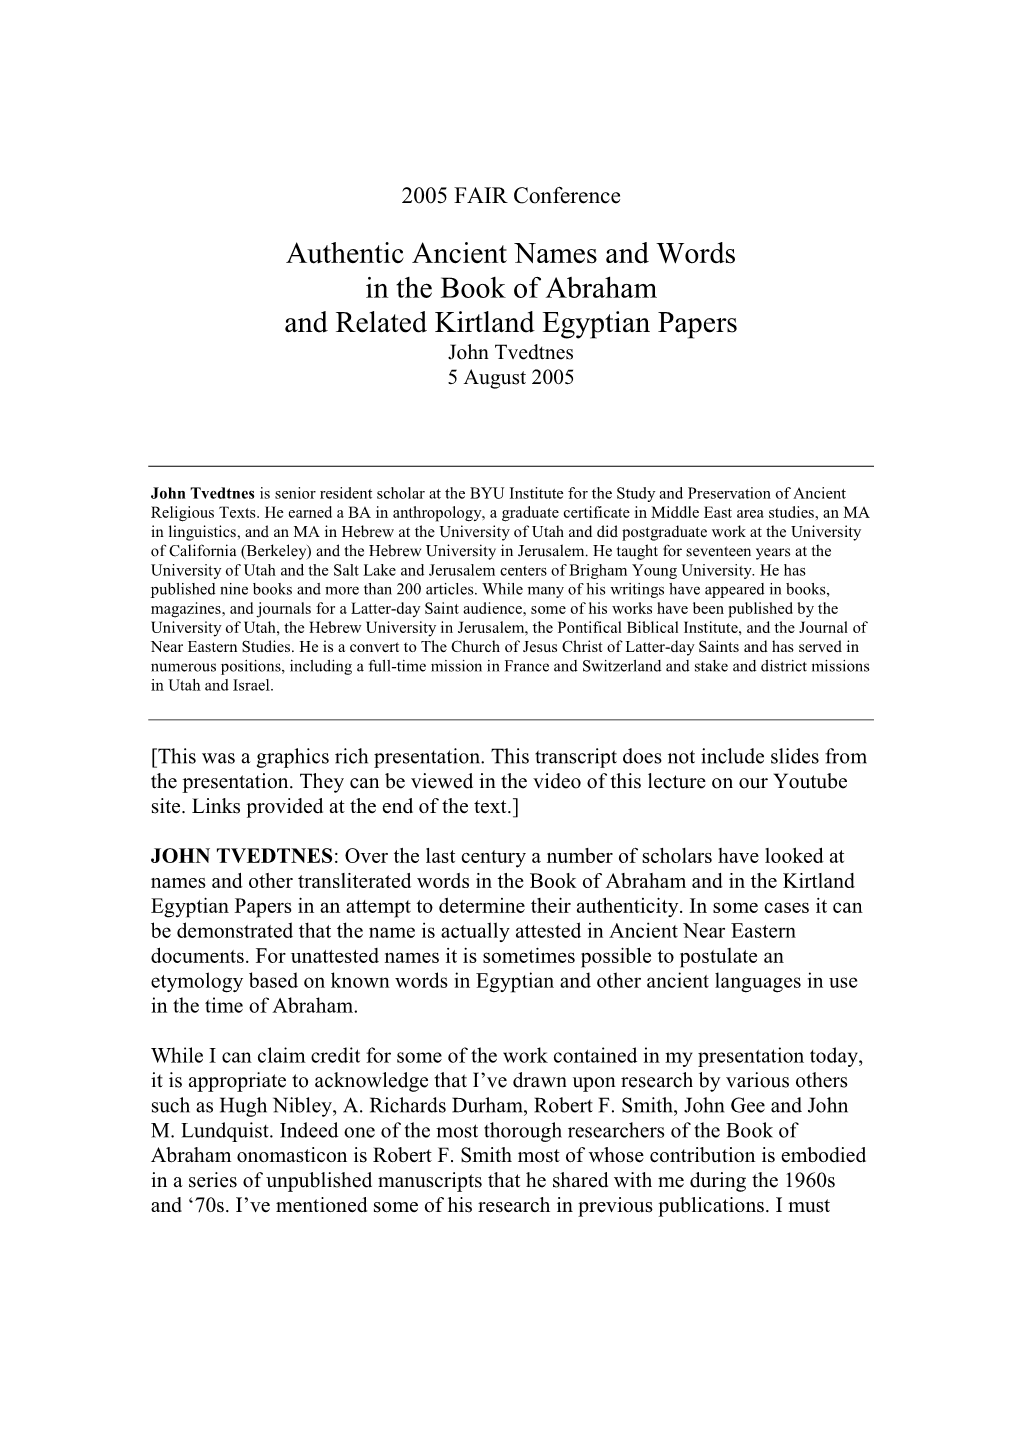 Authentic Ancient Names and Words in the Book of Abraham and Related Kirtland Egyptian Papers John Tvedtnes 5 August 2005